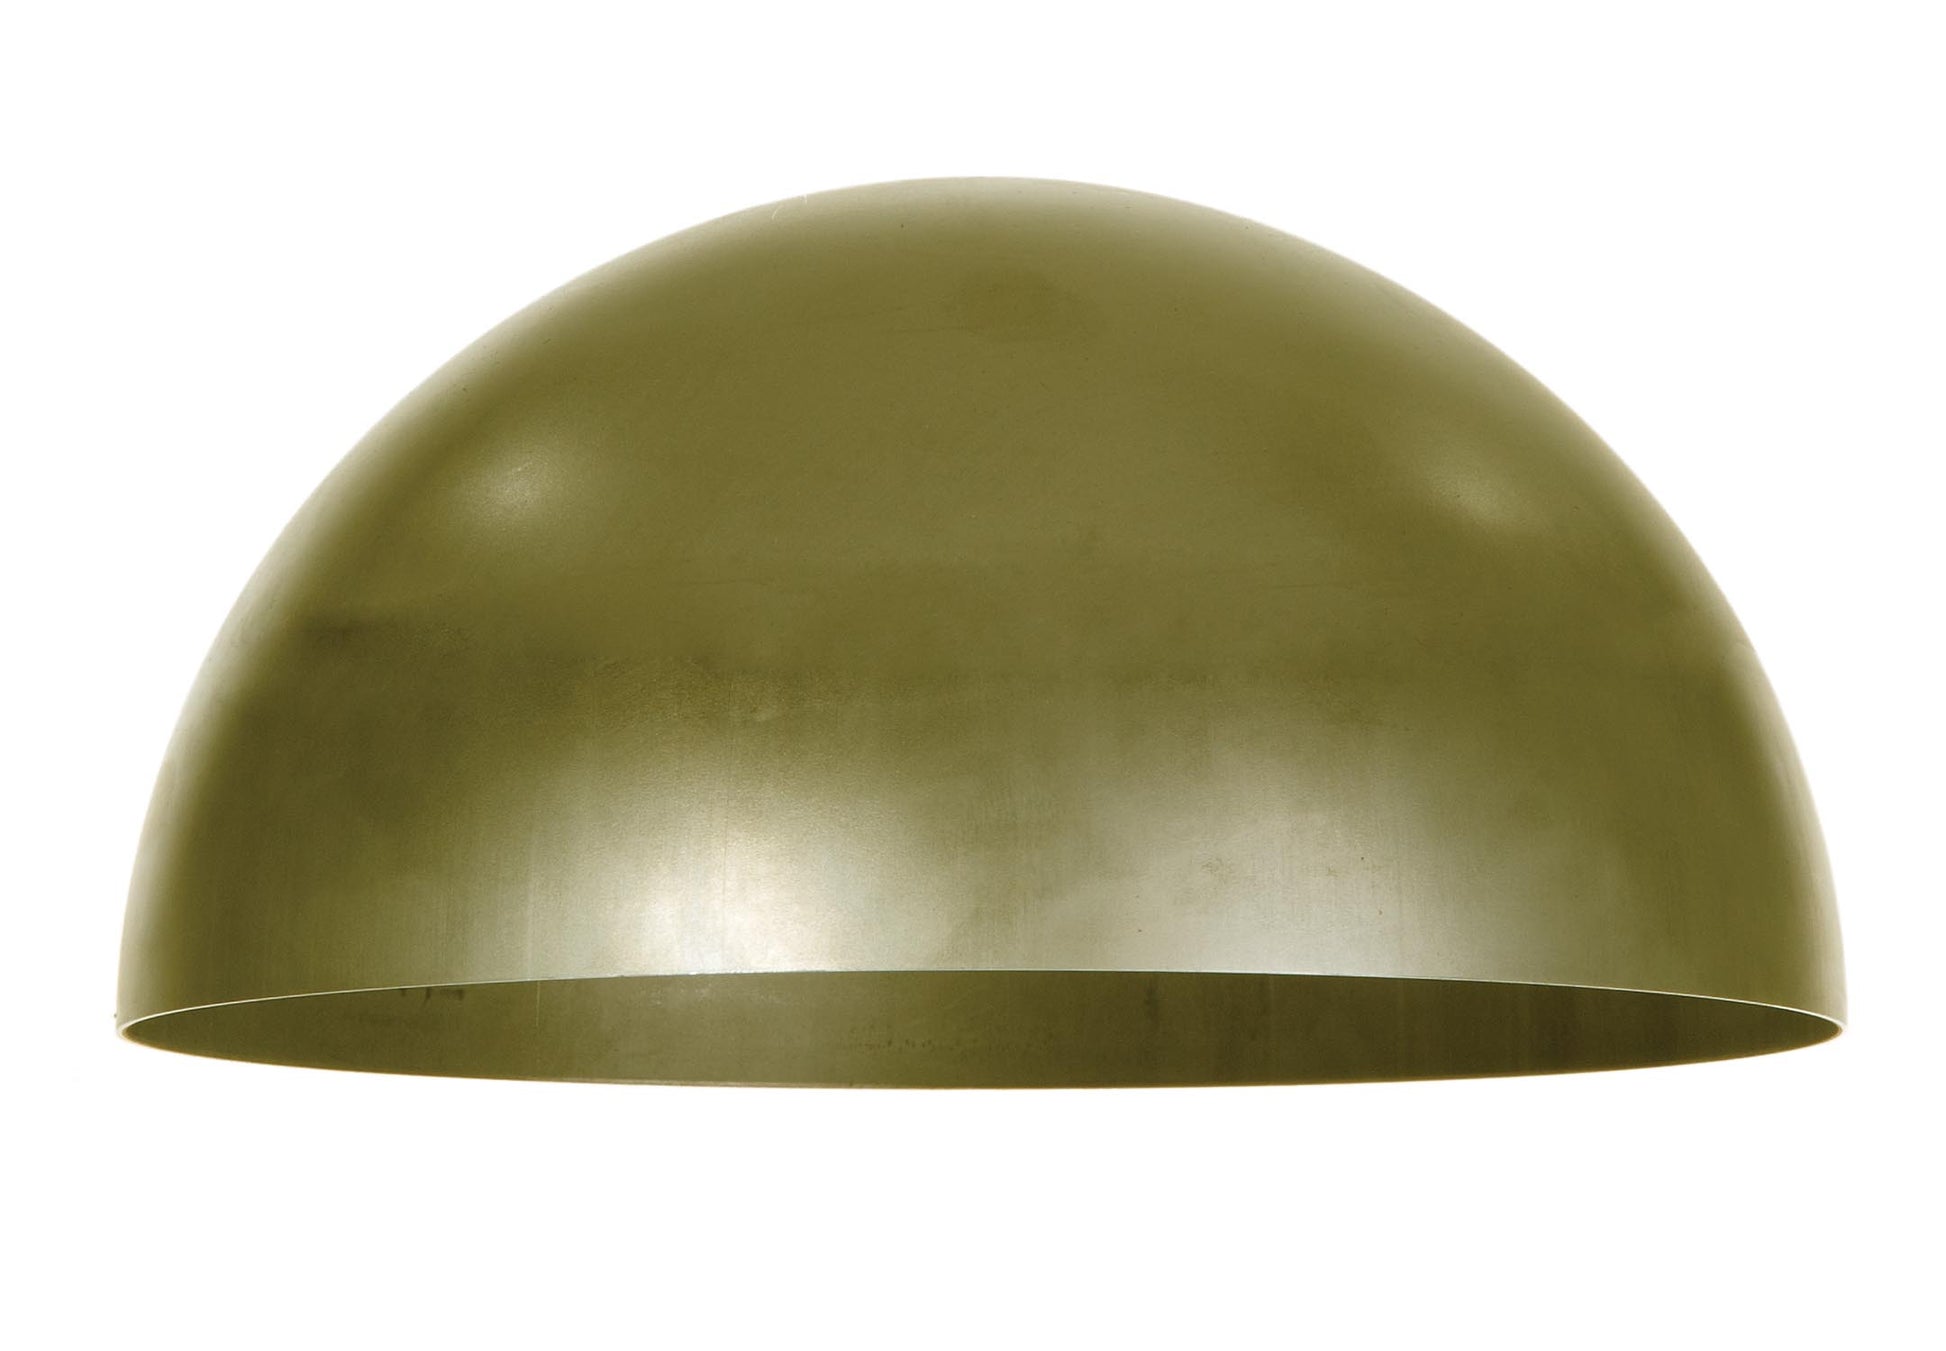 Half-Dome Shape Brass Metal Light Shades - Choose From 3 Sizes